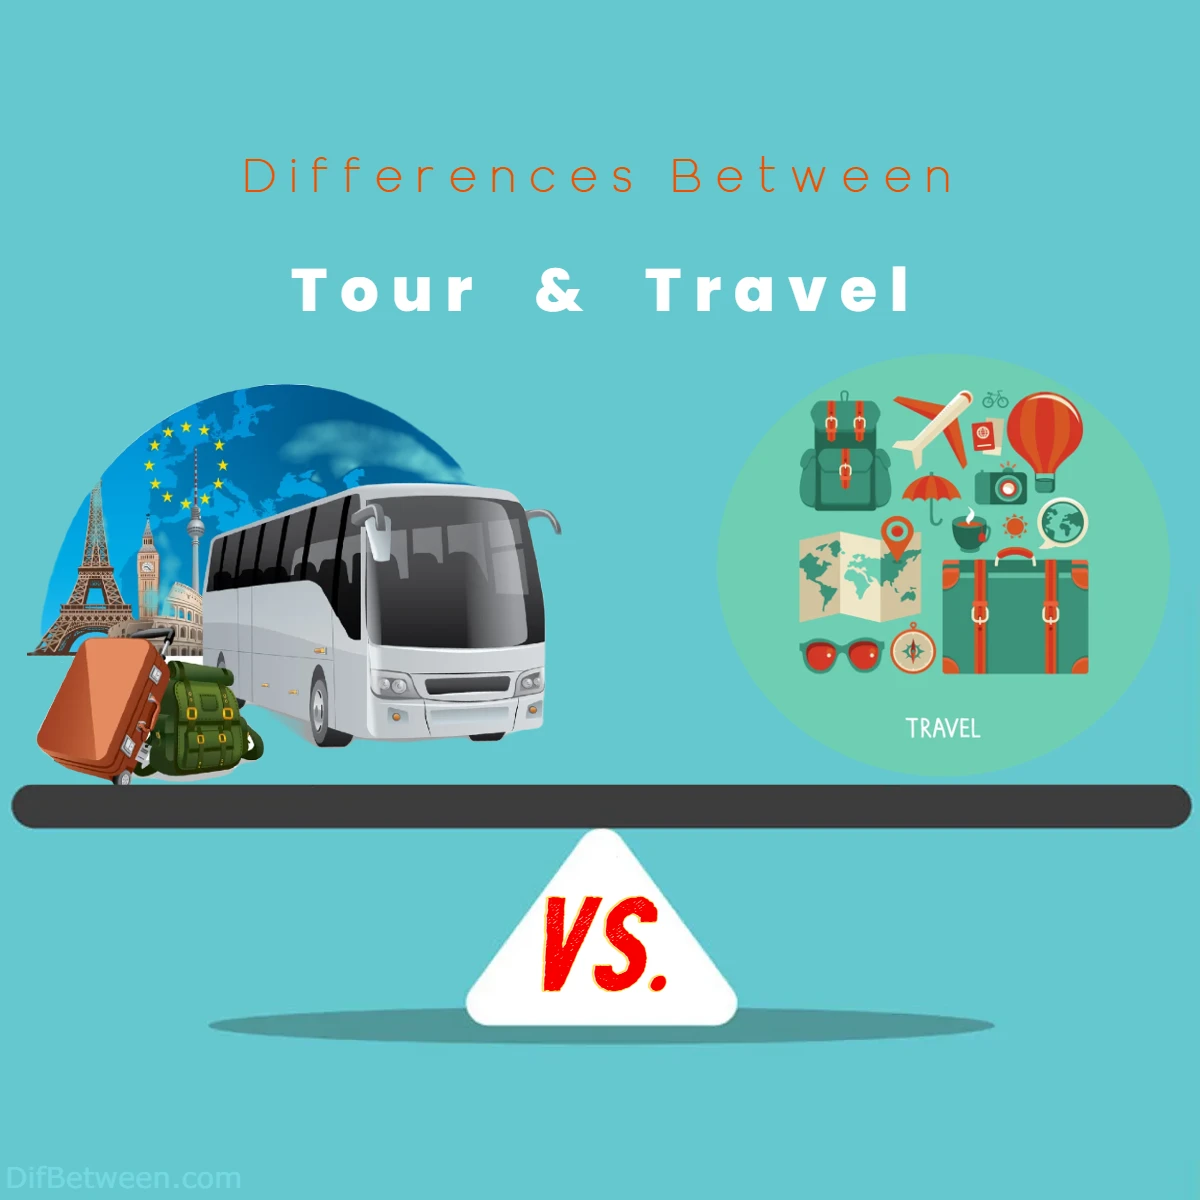 Differences Between Tour vs Travel